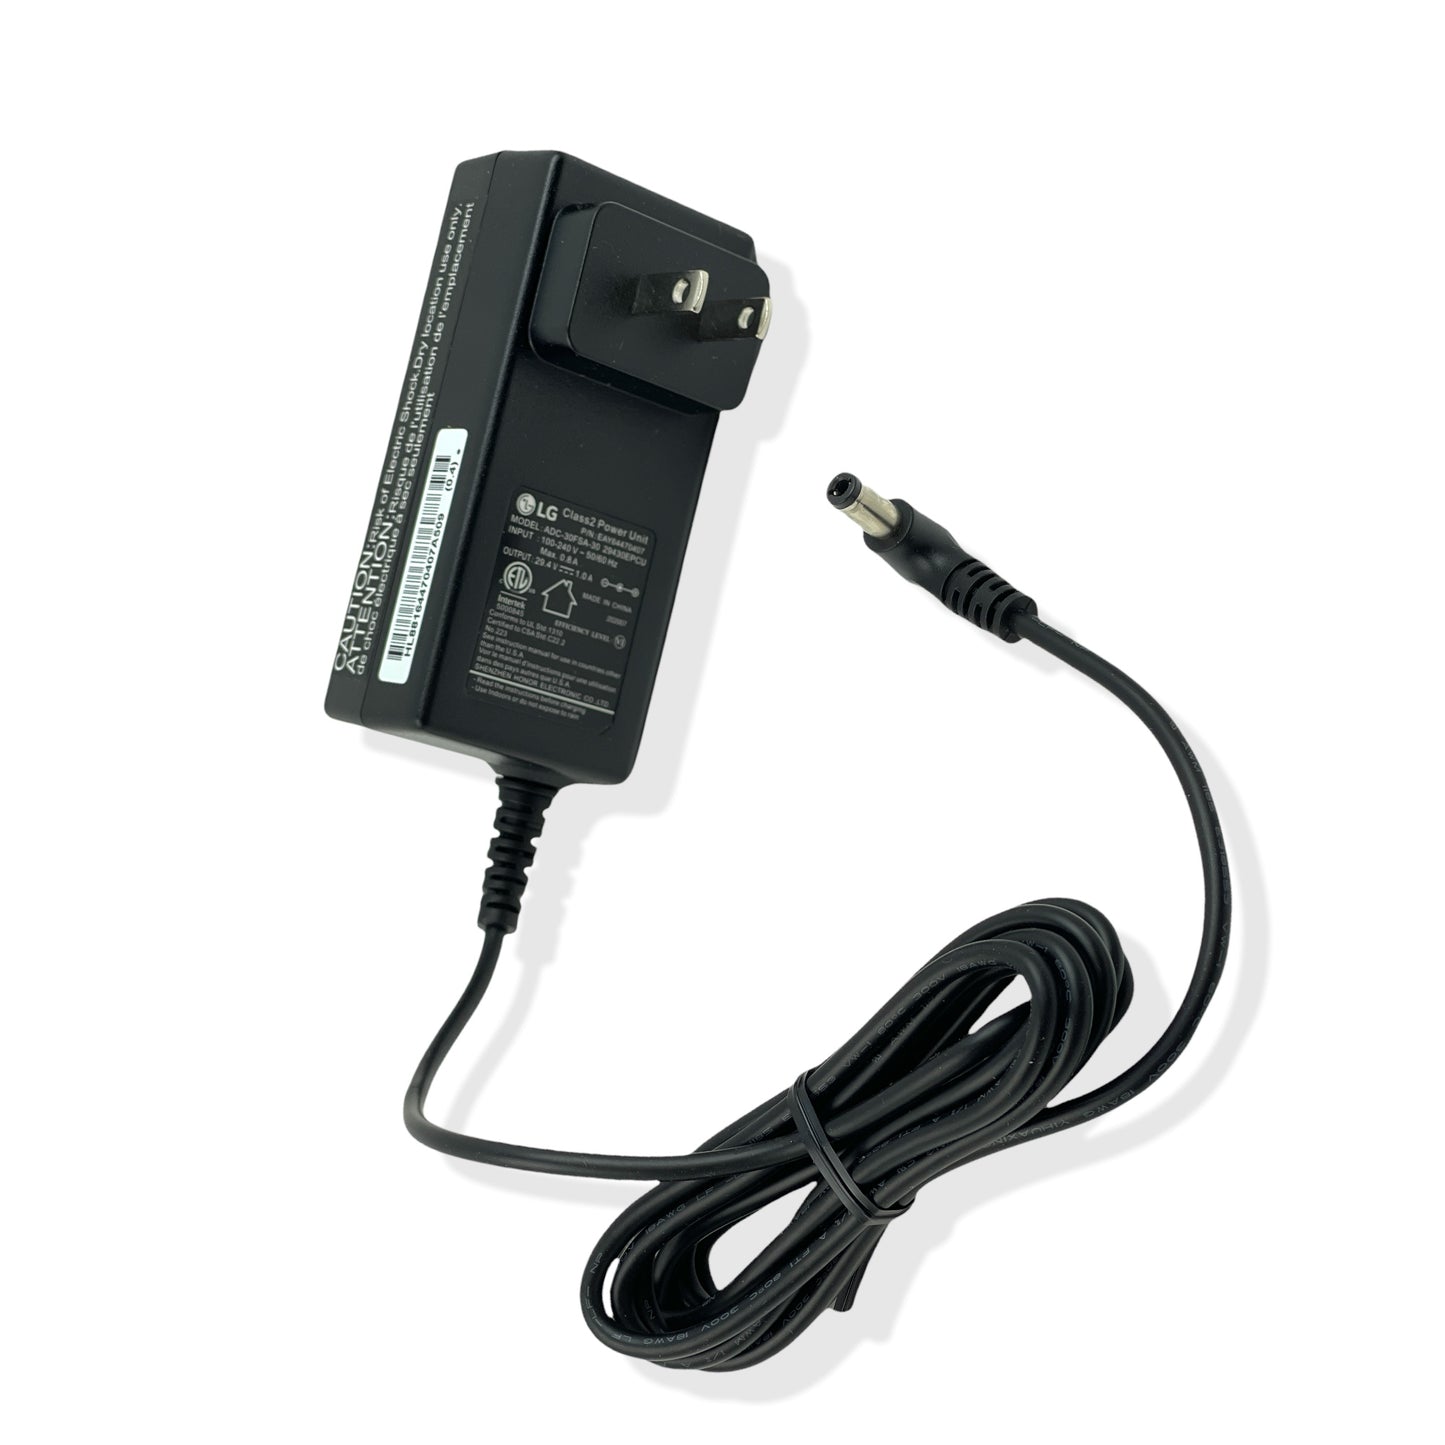 NEW LG CordZero A9 Vacuum A/C Wall Adapter Charger